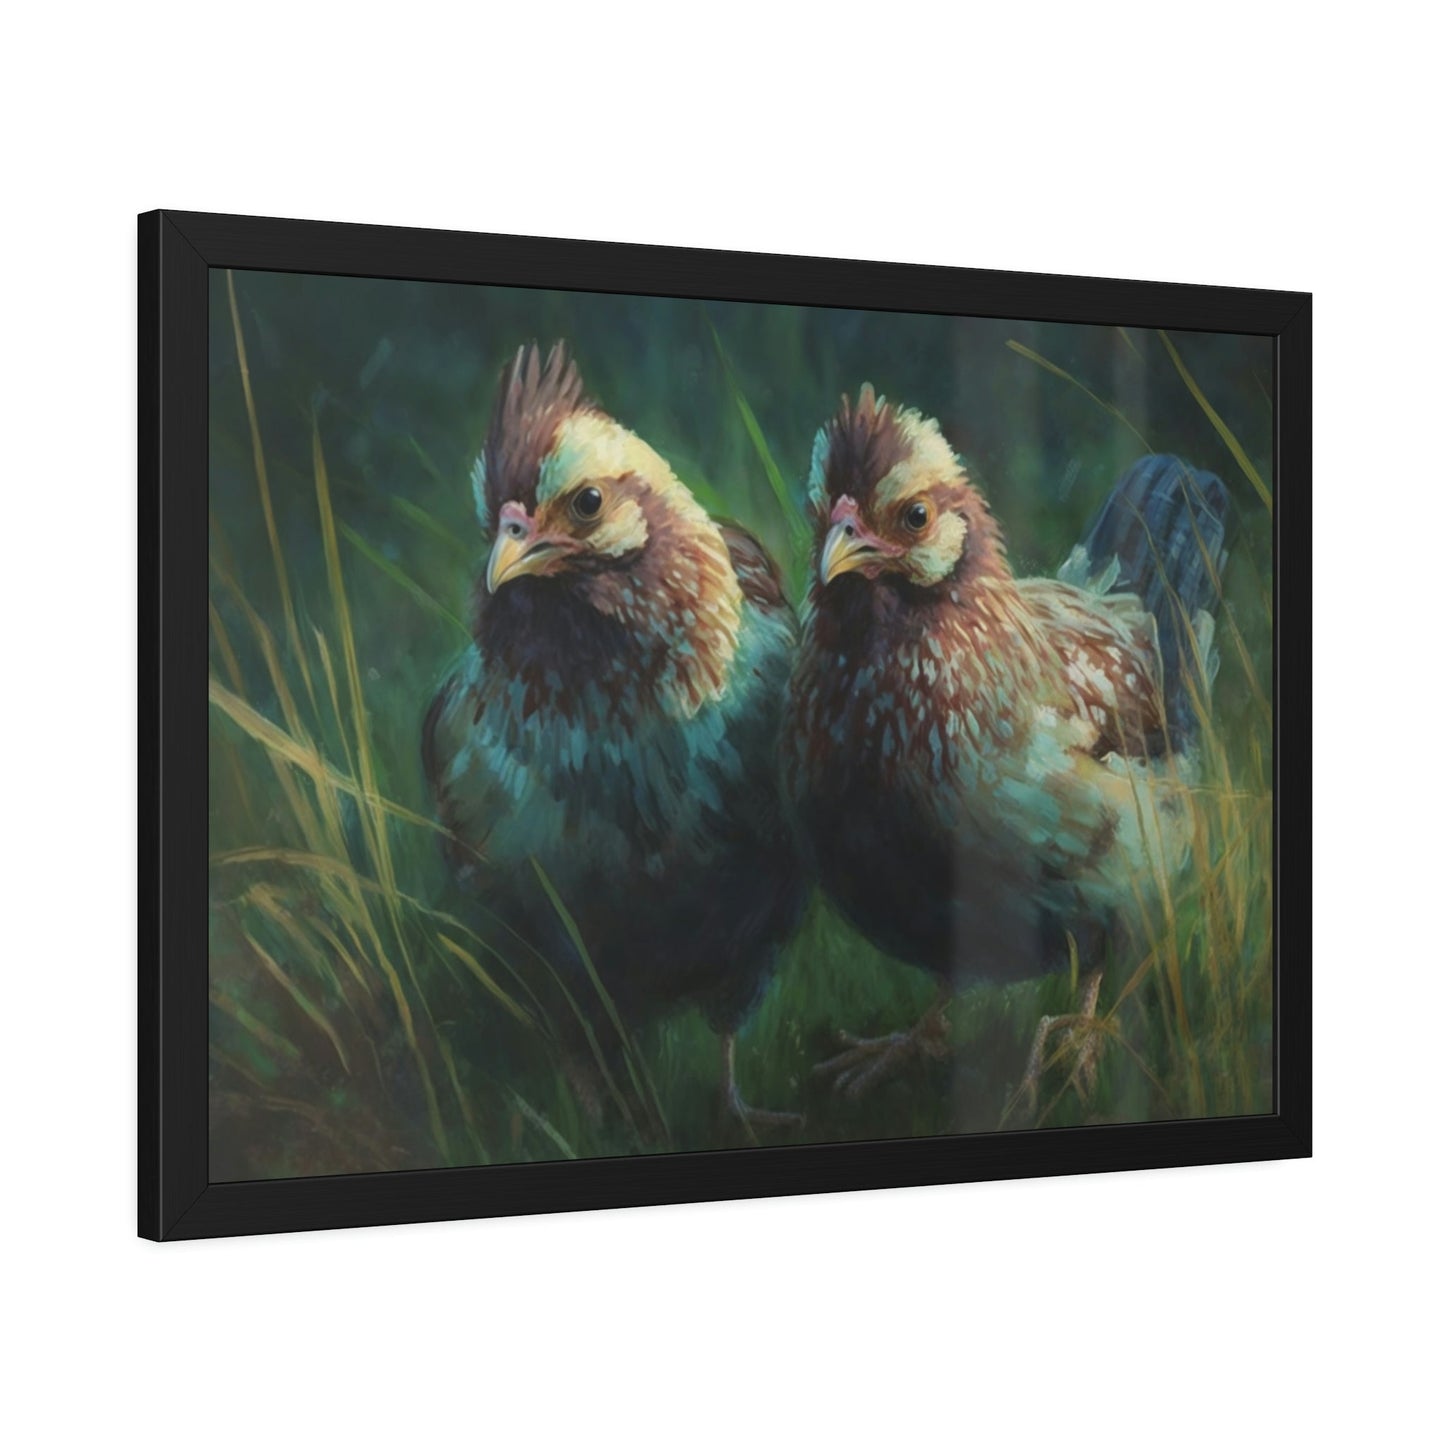 Fluffy Chickens: Canvas Art with Soft and Adorable Baby Chicks